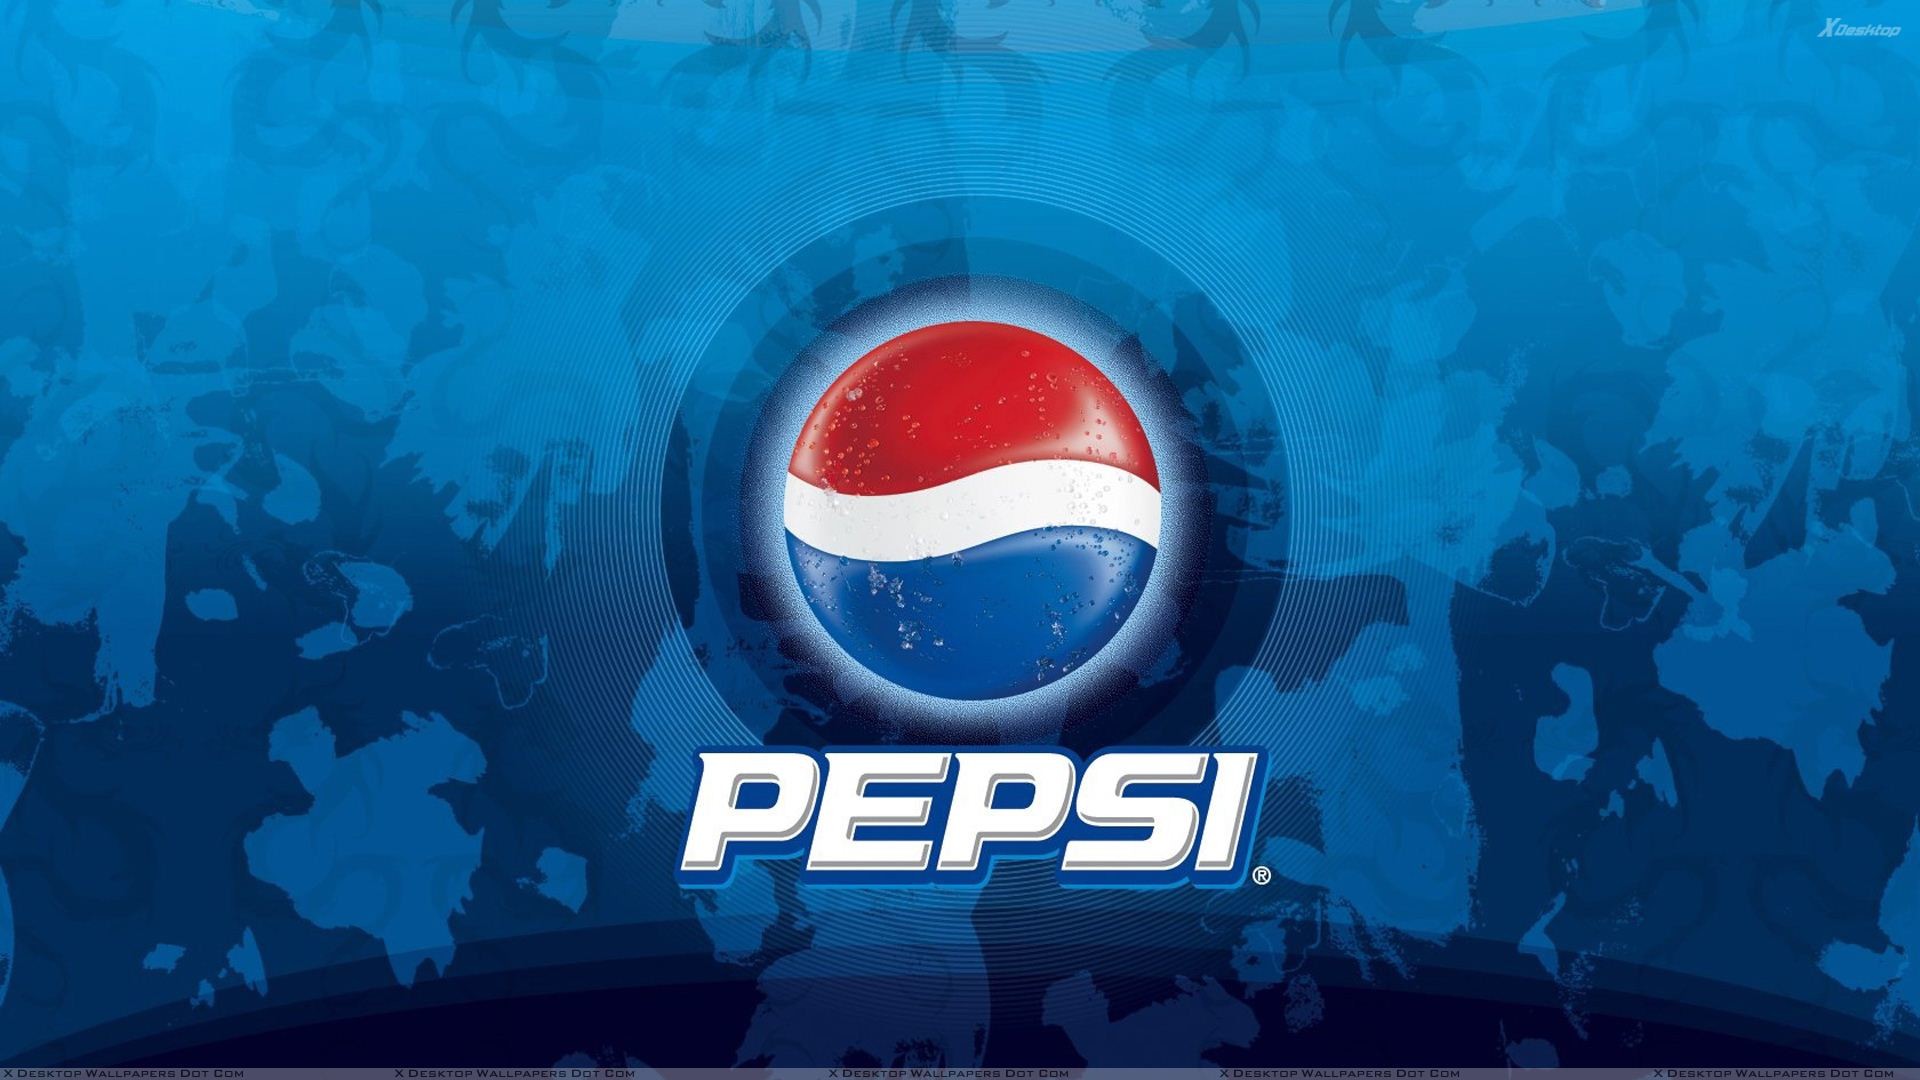 1920x1080 You are viewing wallpaper titled "Pepsi Logo ...